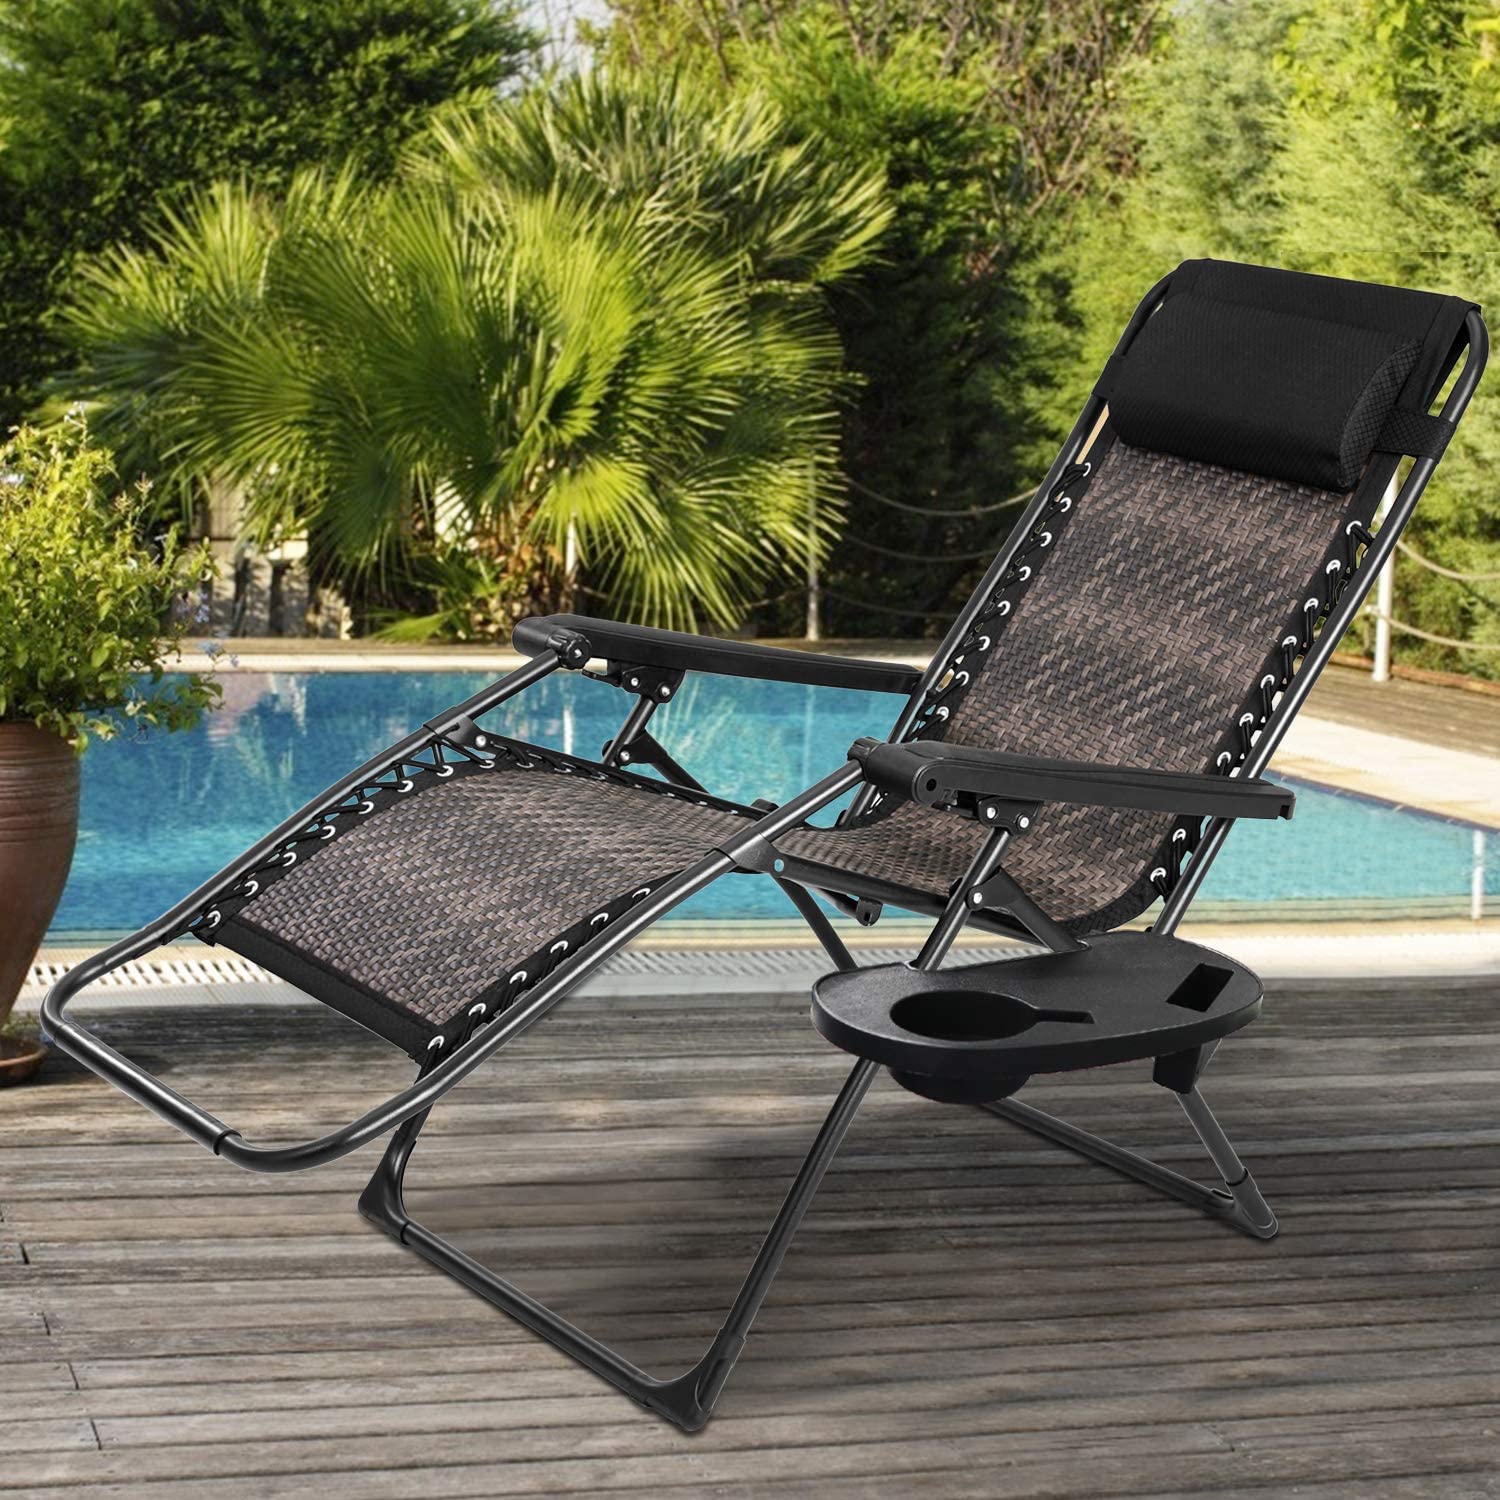 SOLAURA Zero Gravity Chair Outdoor Patio Adjustable Folding Wicker Recliner Lounge Chair - image 5 of 7